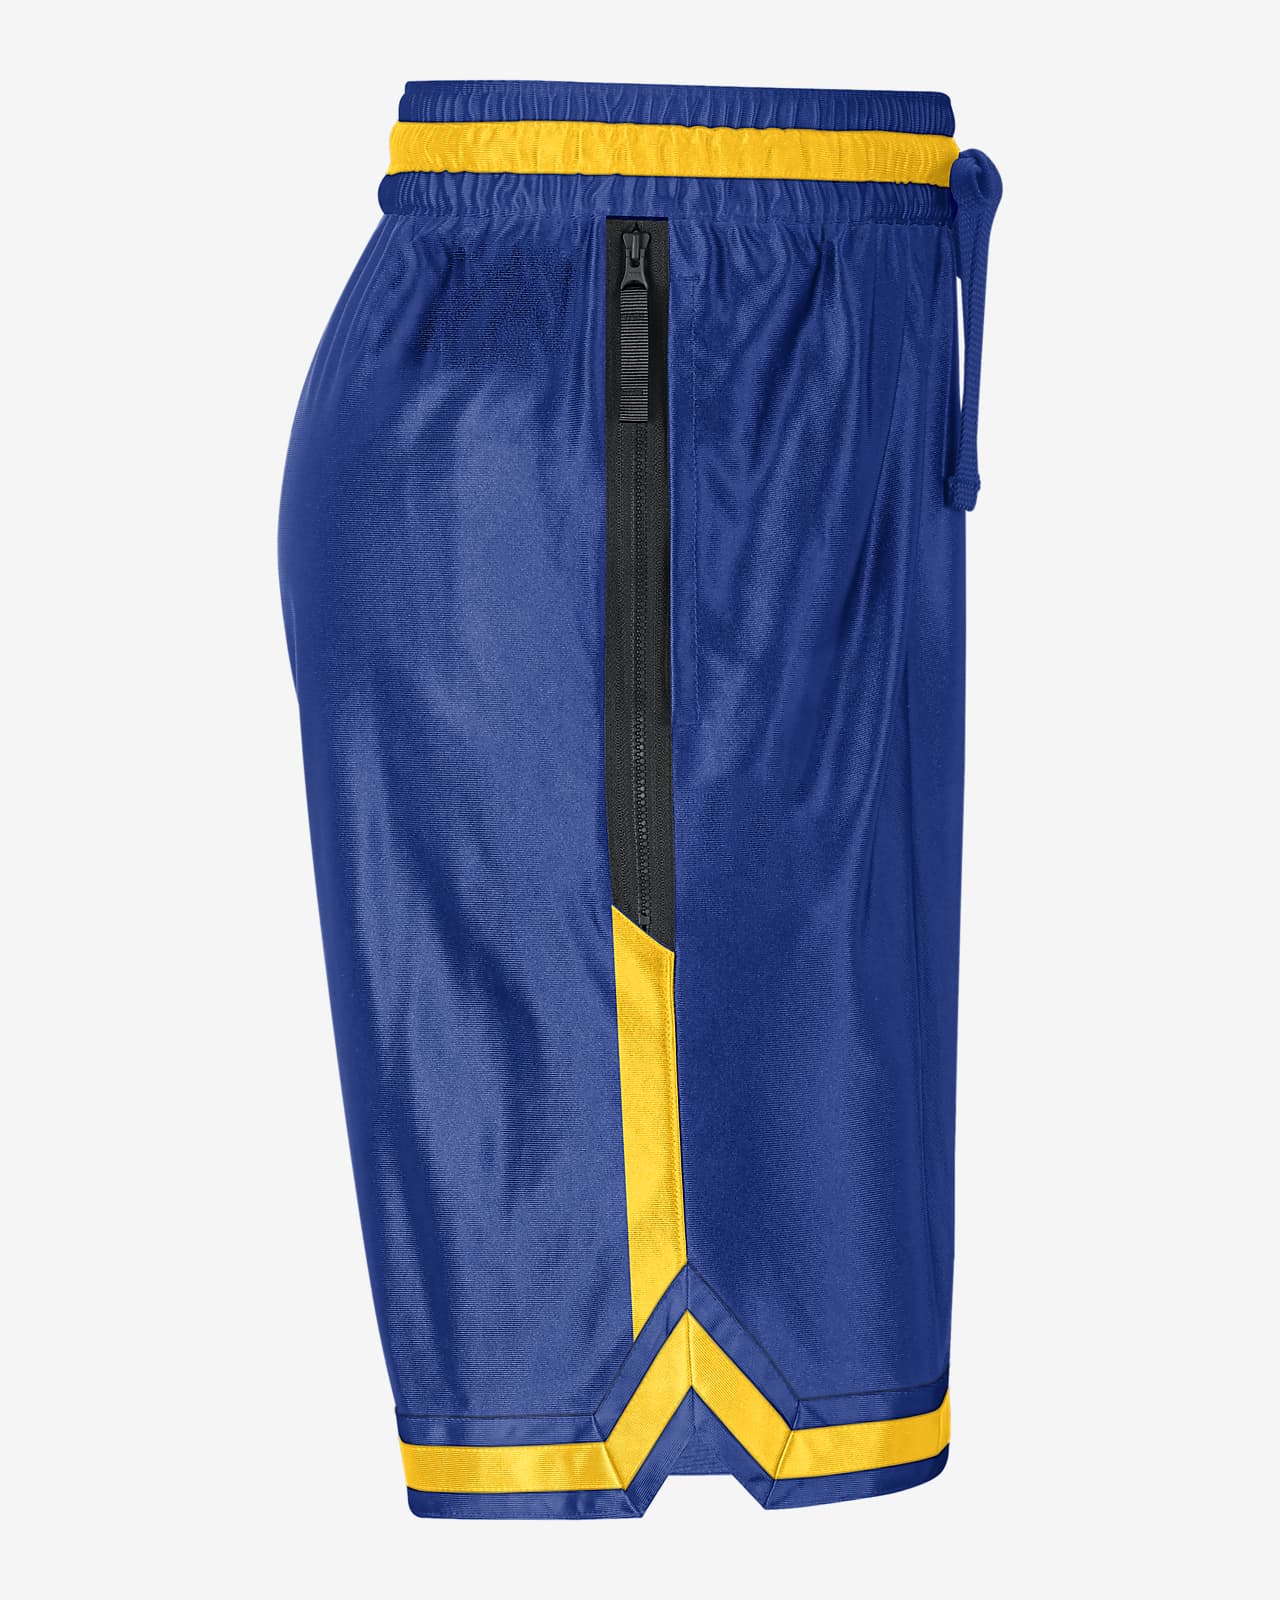 Nike Golden State Warriors NBA Shorts for sale